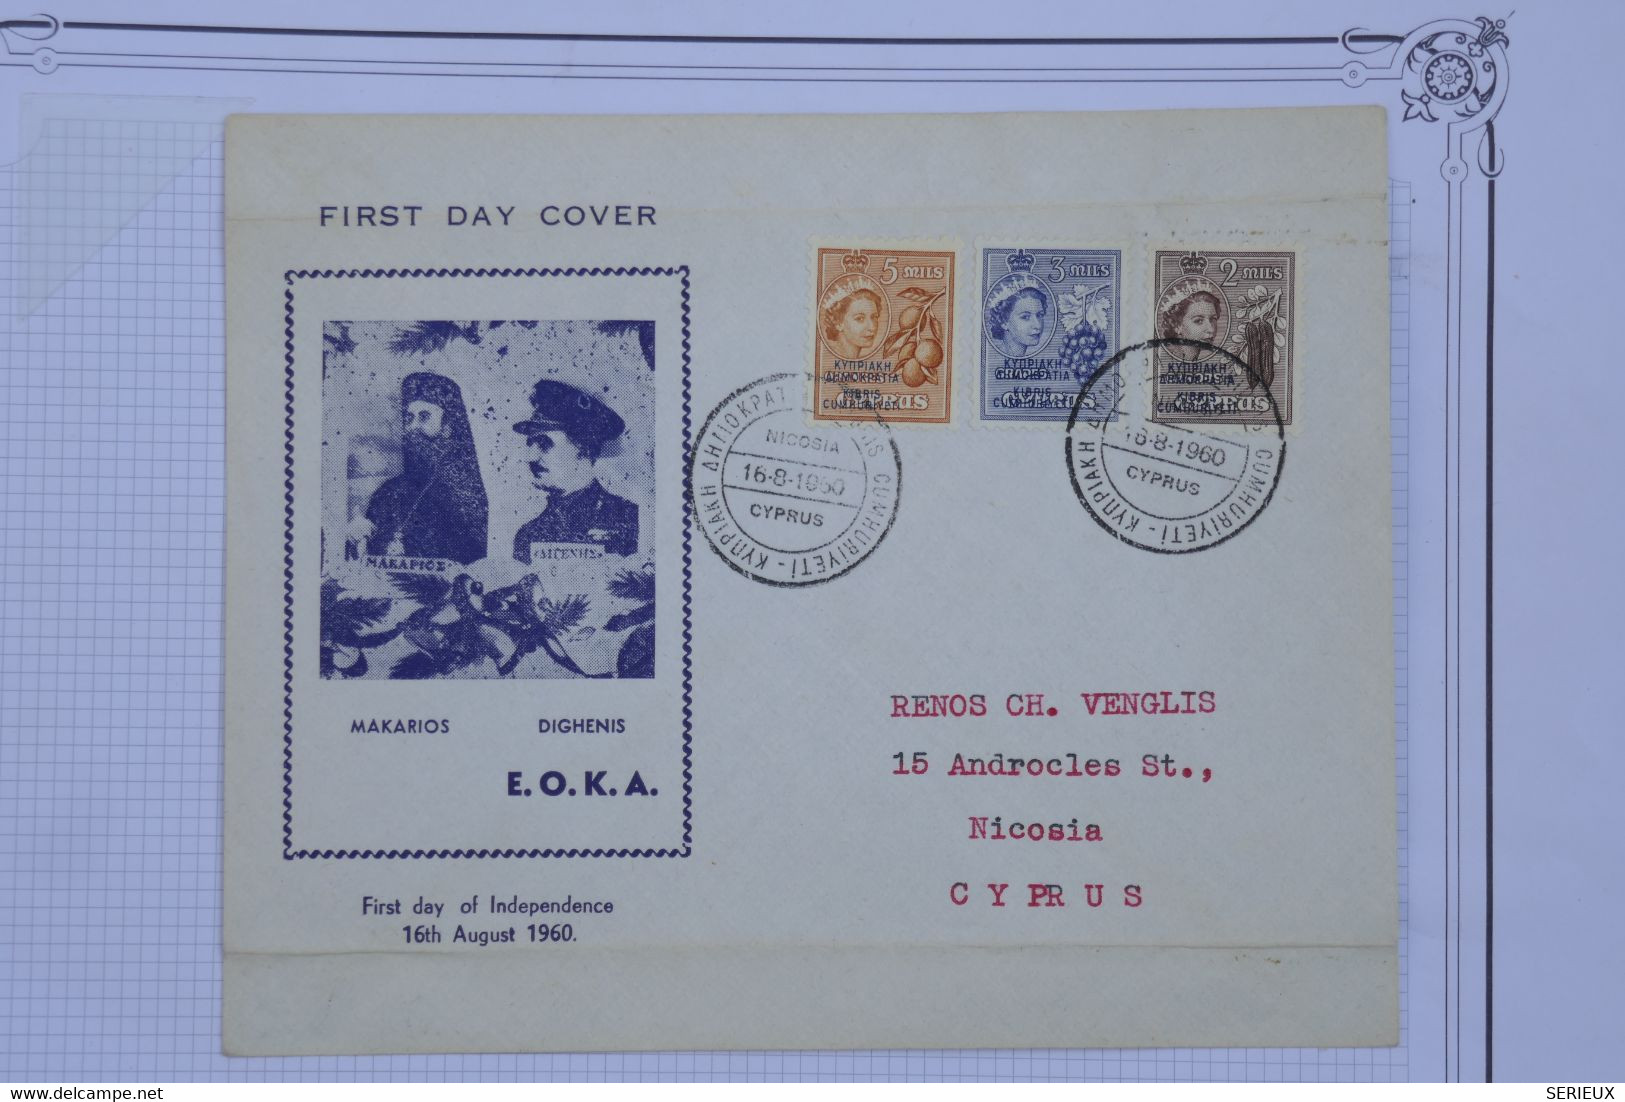 T18 CHYPRE  BELLE LETTRE FDC 1946 CYPRUS NICOSIA    +AFFRANCH. INTERESSANT - Cyprus (...-1960)